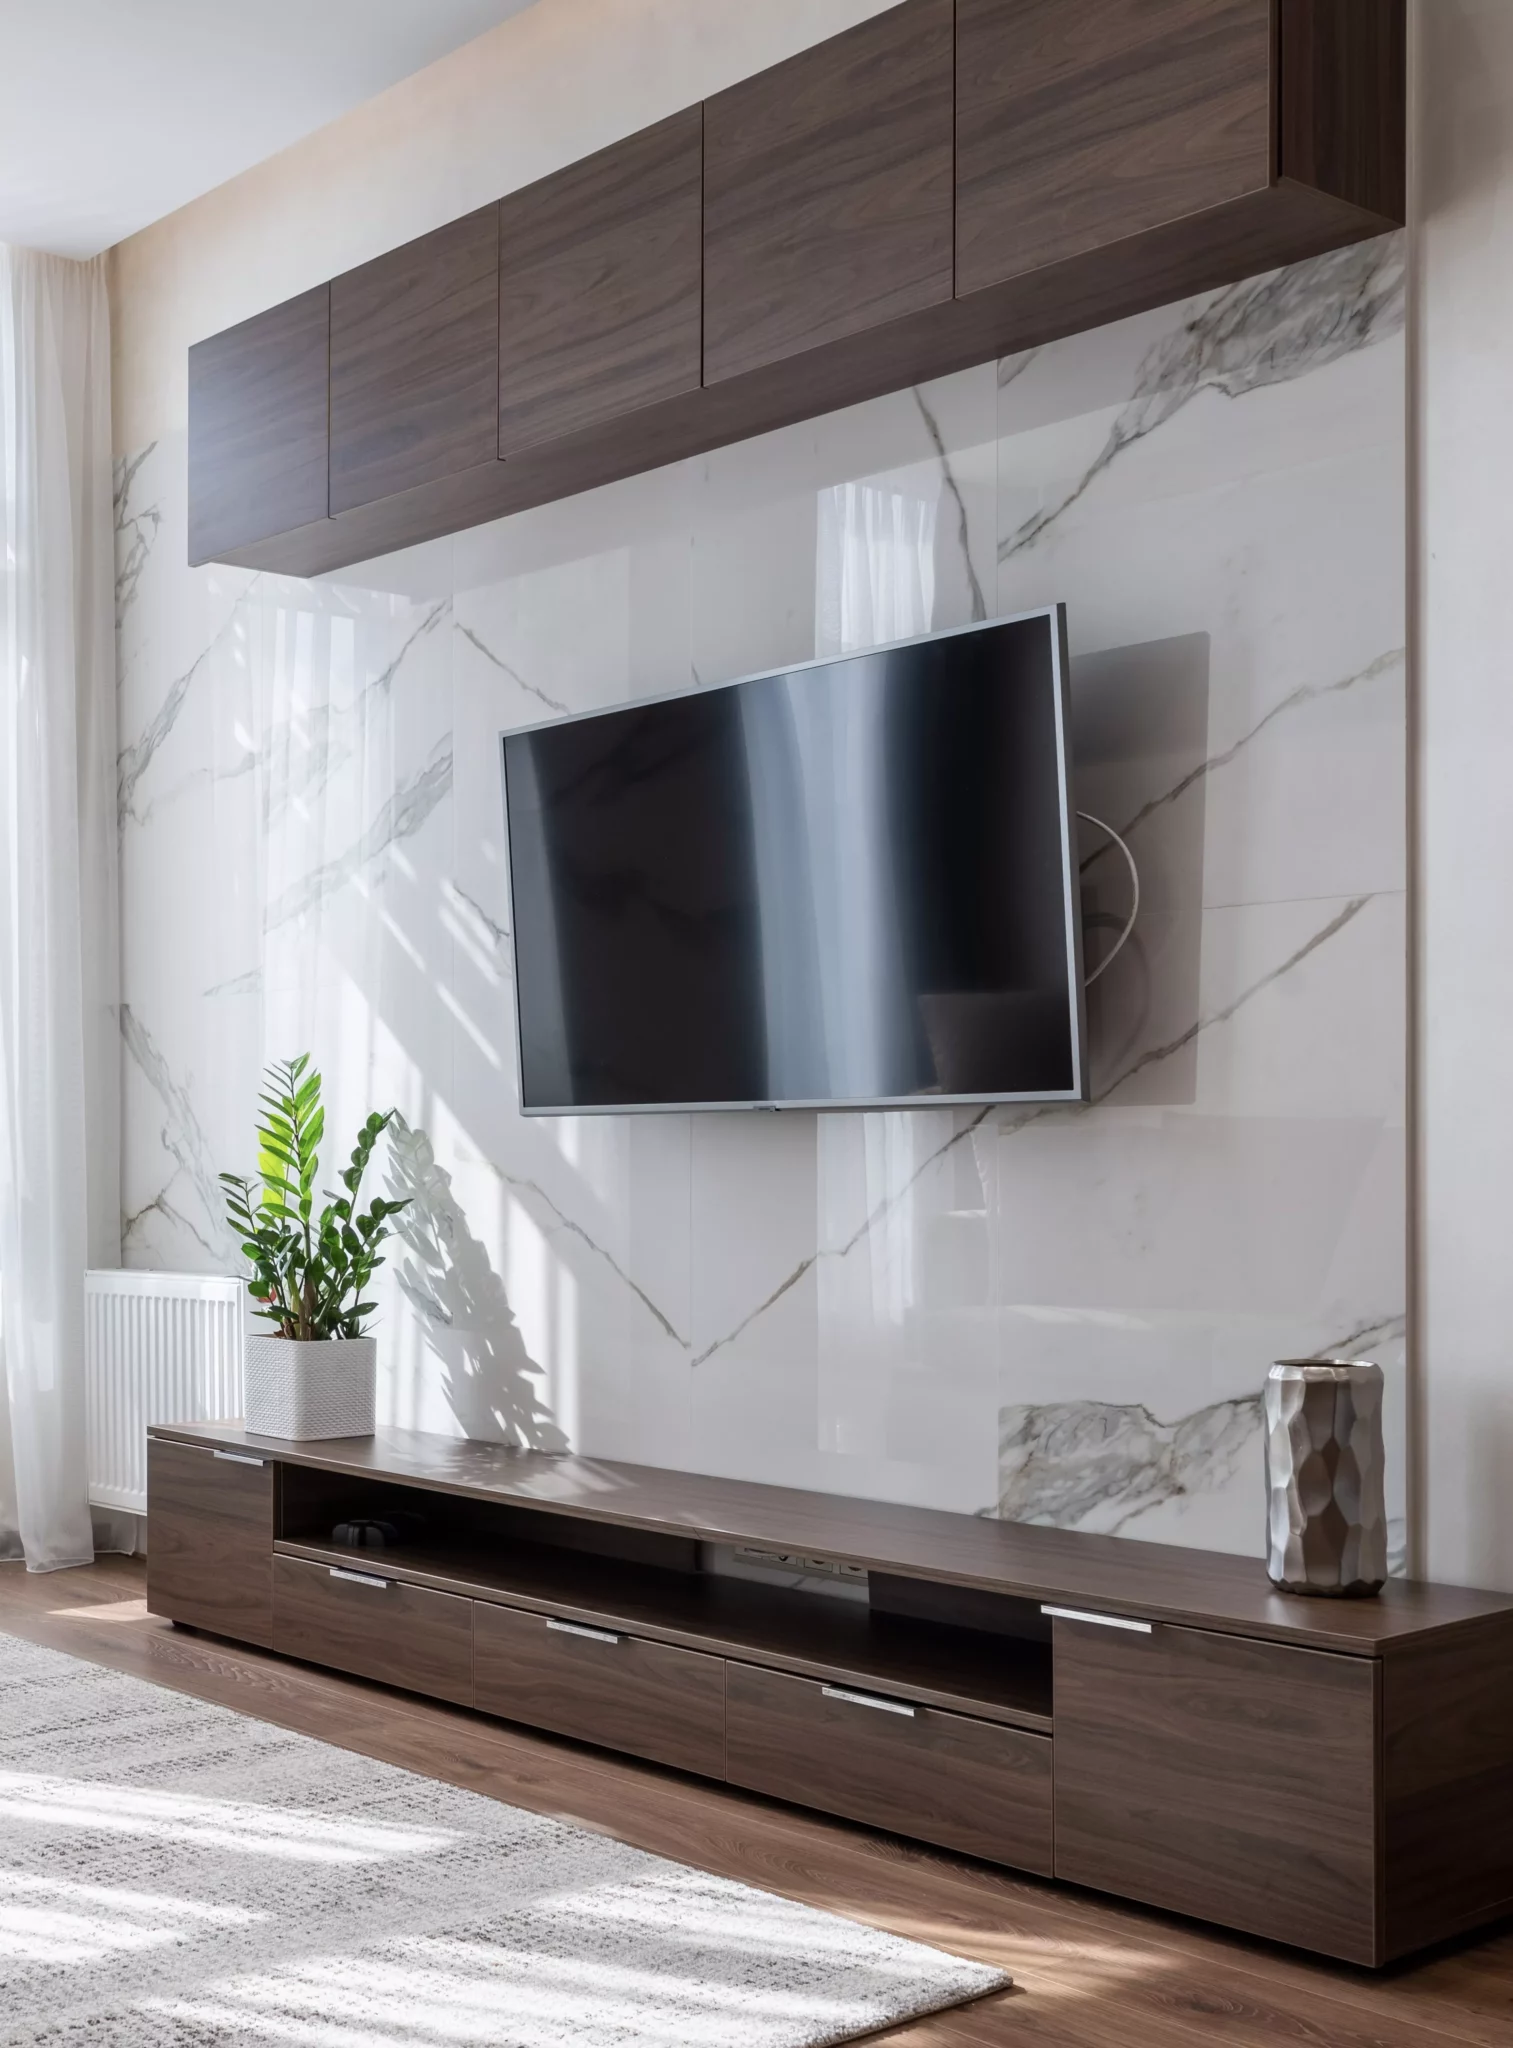 Sony TV Mounting Service in Dallas​